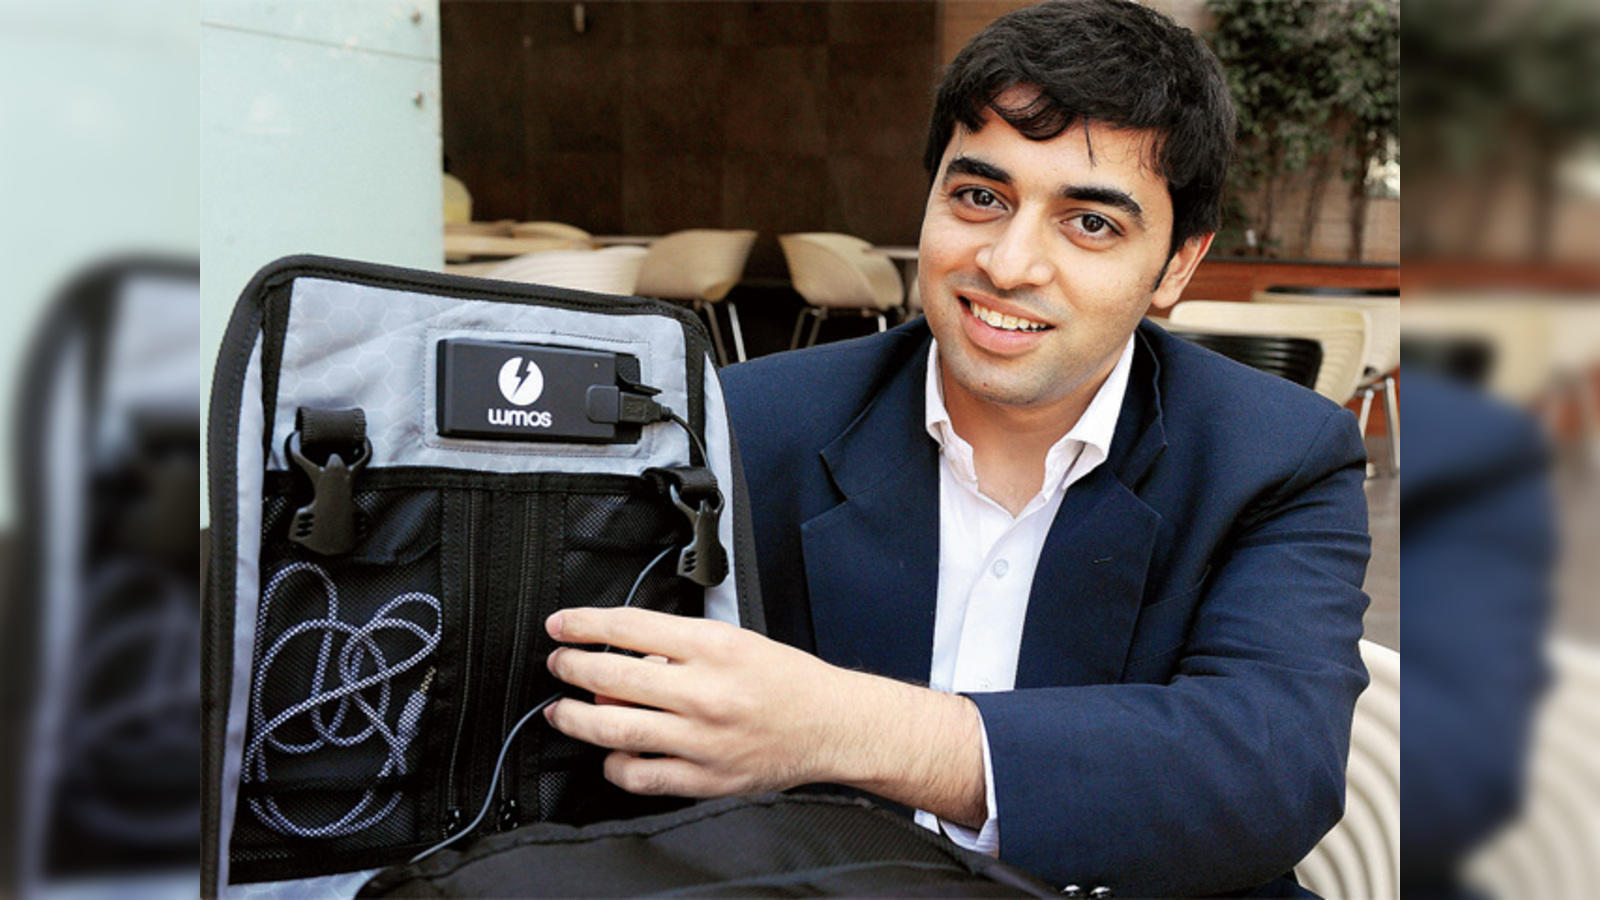 Bangalore startup offers solar power backpacks that charge your cellphone  and tablets on the go - The Economic Times